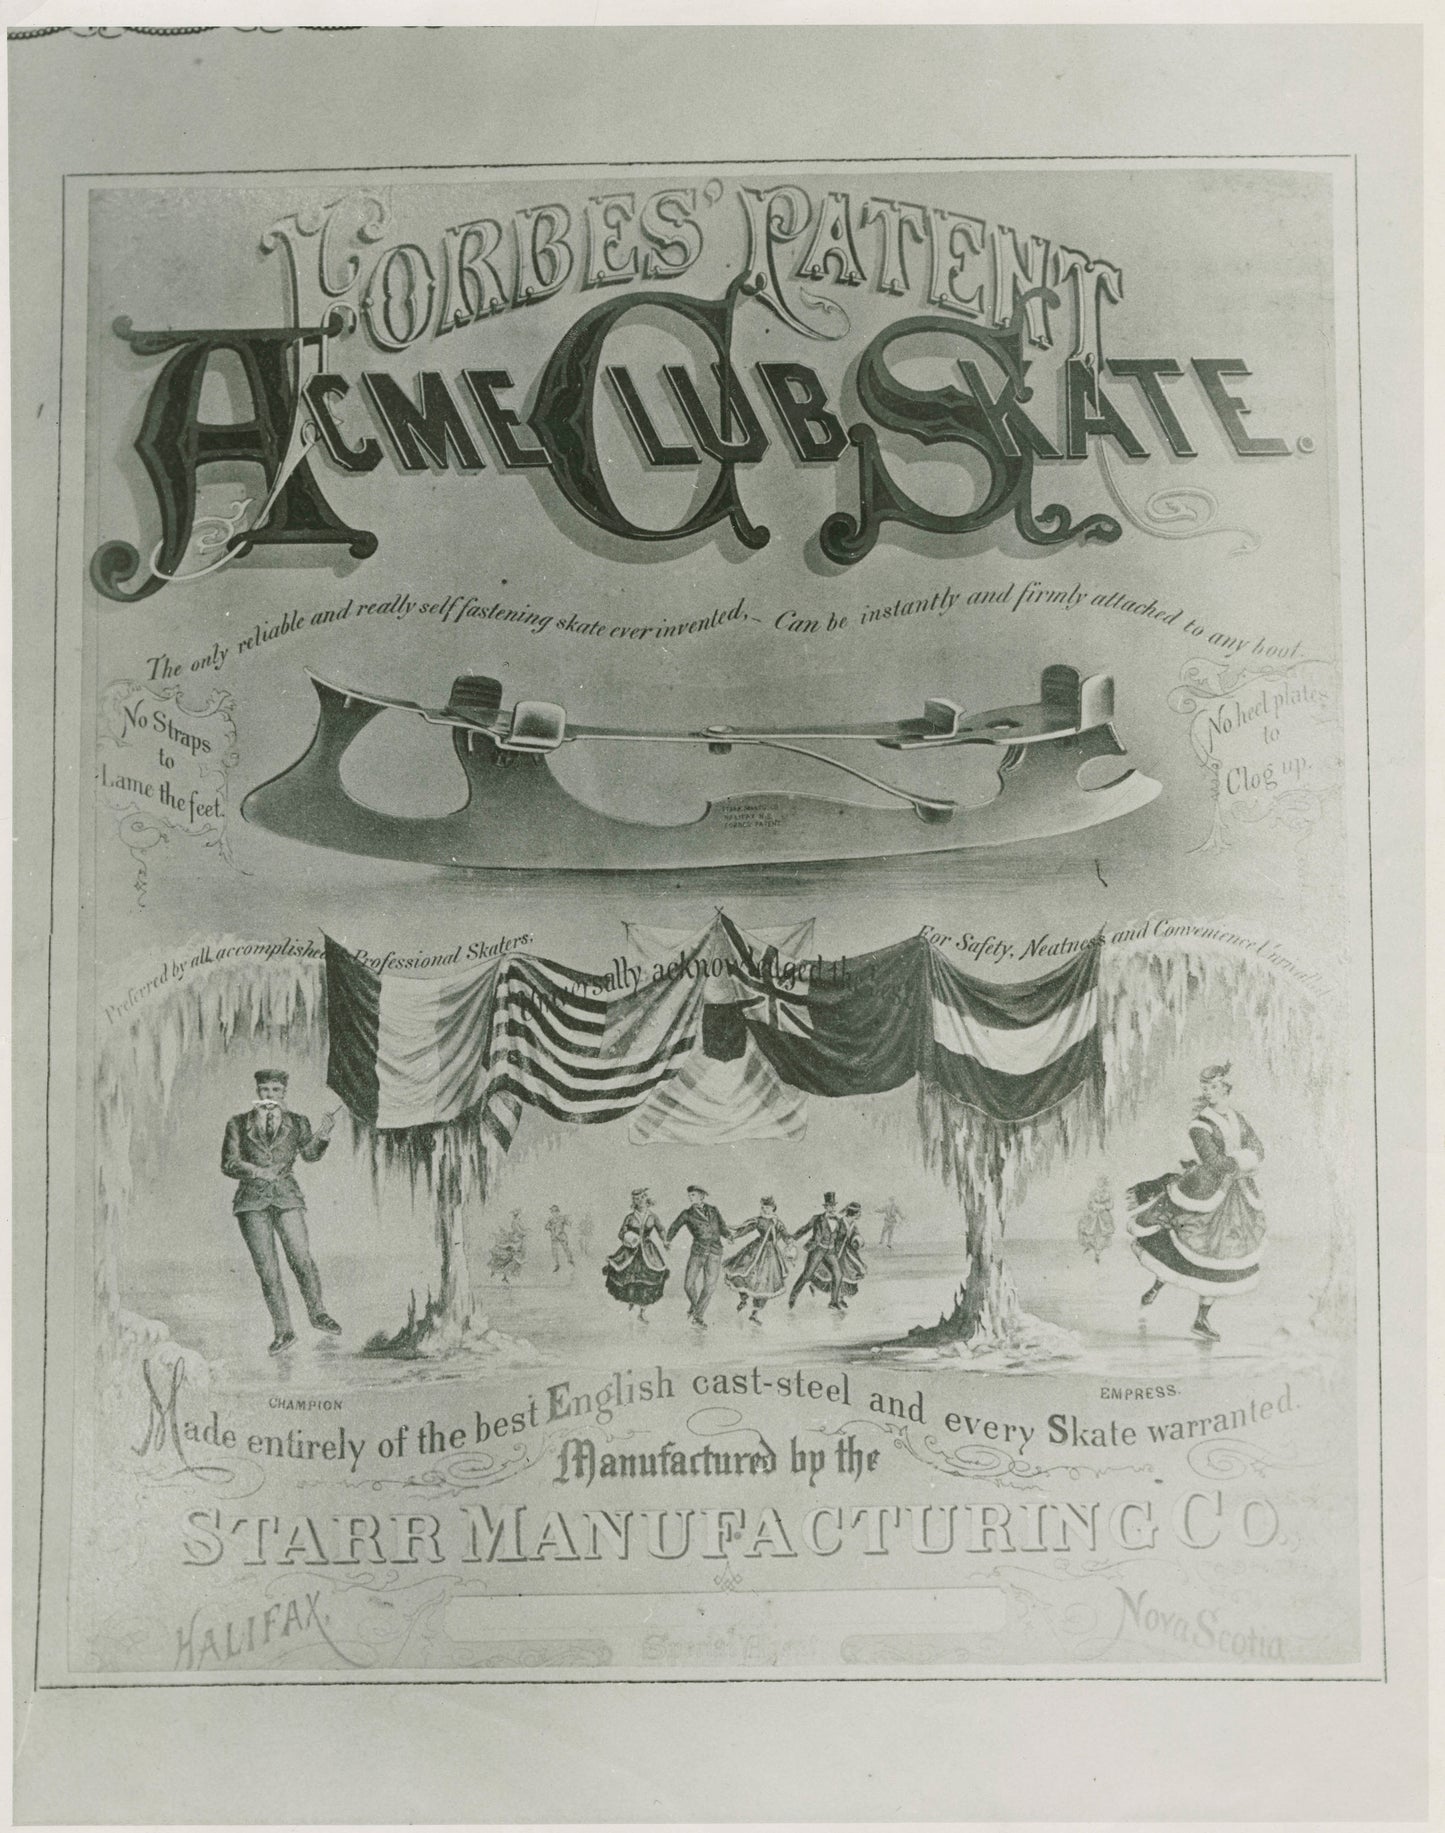 Advertisement for Forbes Patent Acme Club Skate manufactured by the Starr Manufacturing Co., Dartmouth, N.S.